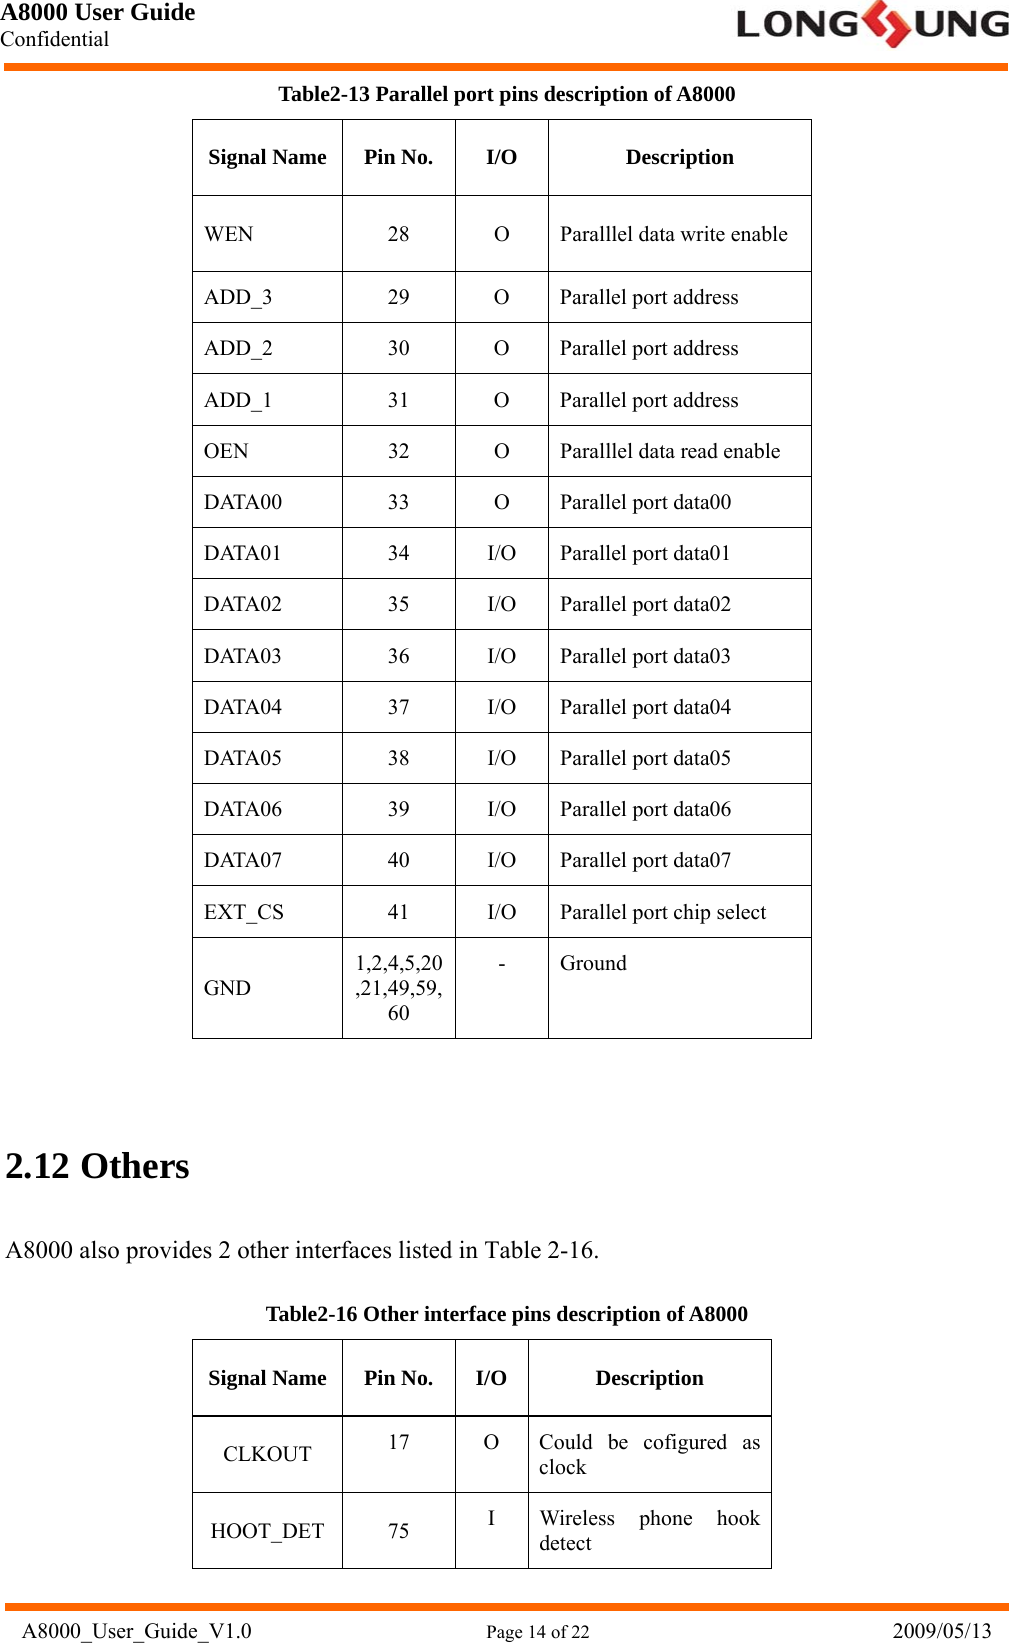 A8000 User Guide Confidential   A8000_User_Guide_V1.0                      Page 14 of 22                            2009/05/13 Table2-13 Parallel port pins description of A8000 Signal Name  Pin No.  I/O  Description WEN  28  O  Paralllel data write enable ADD_3  29  O  Parallel port address ADD_2  30  O  Parallel port address ADD_1  31  O  Parallel port address OEN  32  O  Paralllel data read enable DATA00 33 O Parallel port data00 DATA01 34 I/O Parallel port data01 DATA02 35 I/O Parallel port data02 DATA03 36 I/O Parallel port data03 DATA04 37 I/O Parallel port data04 DATA05 38 I/O Parallel port data05 DATA06 39 I/O Parallel port data06 DATA07 40 I/O Parallel port data07 EXT_CS  41  I/O  Parallel port chip select GND 1,2,4,5,20,21,49,59,60 - Ground   2.12 Others A8000 also provides 2 other interfaces listed in Table 2-16. Table2-16 Other interface pins description of A8000 Signal Name  Pin No.  I/O  Description CLKOUT  17  O  Could be cofigured as clock HOOT_DET 75  I Wireless phone hook detect 